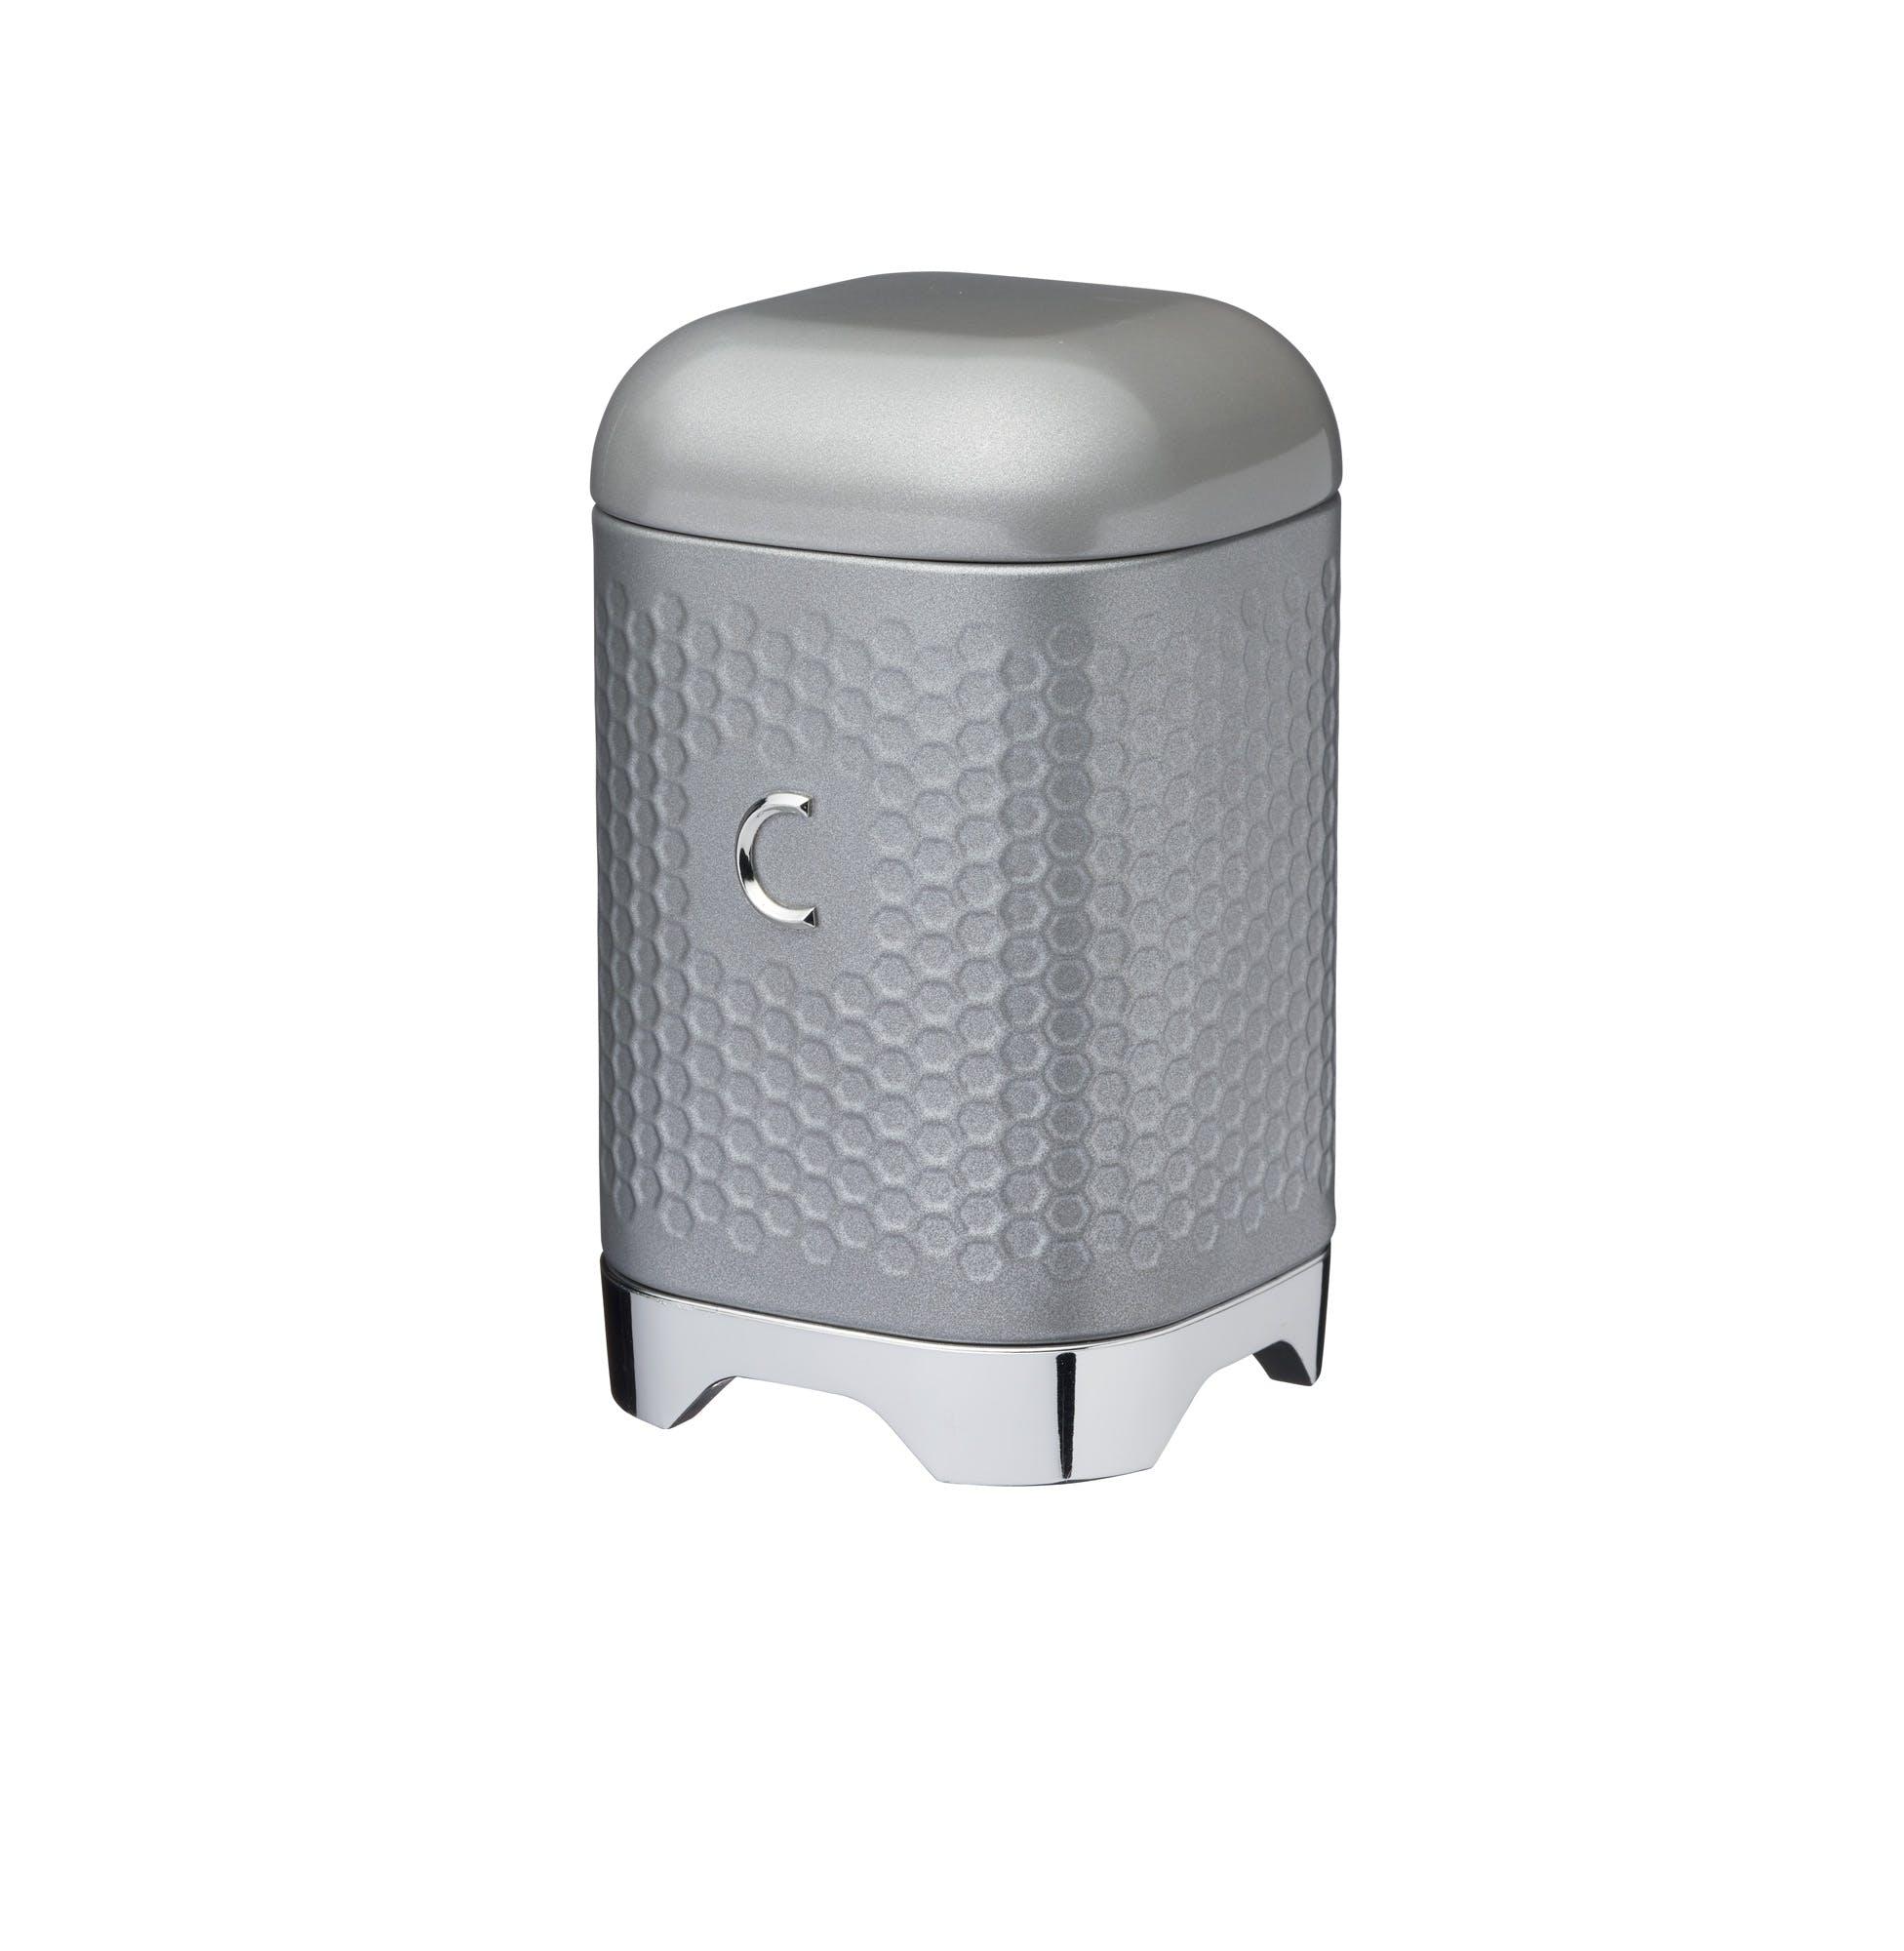 Lovello Retro Coffee Canister with Geometric Textured Finish - Shadow Grey - The Cooks Cupboard Ltd